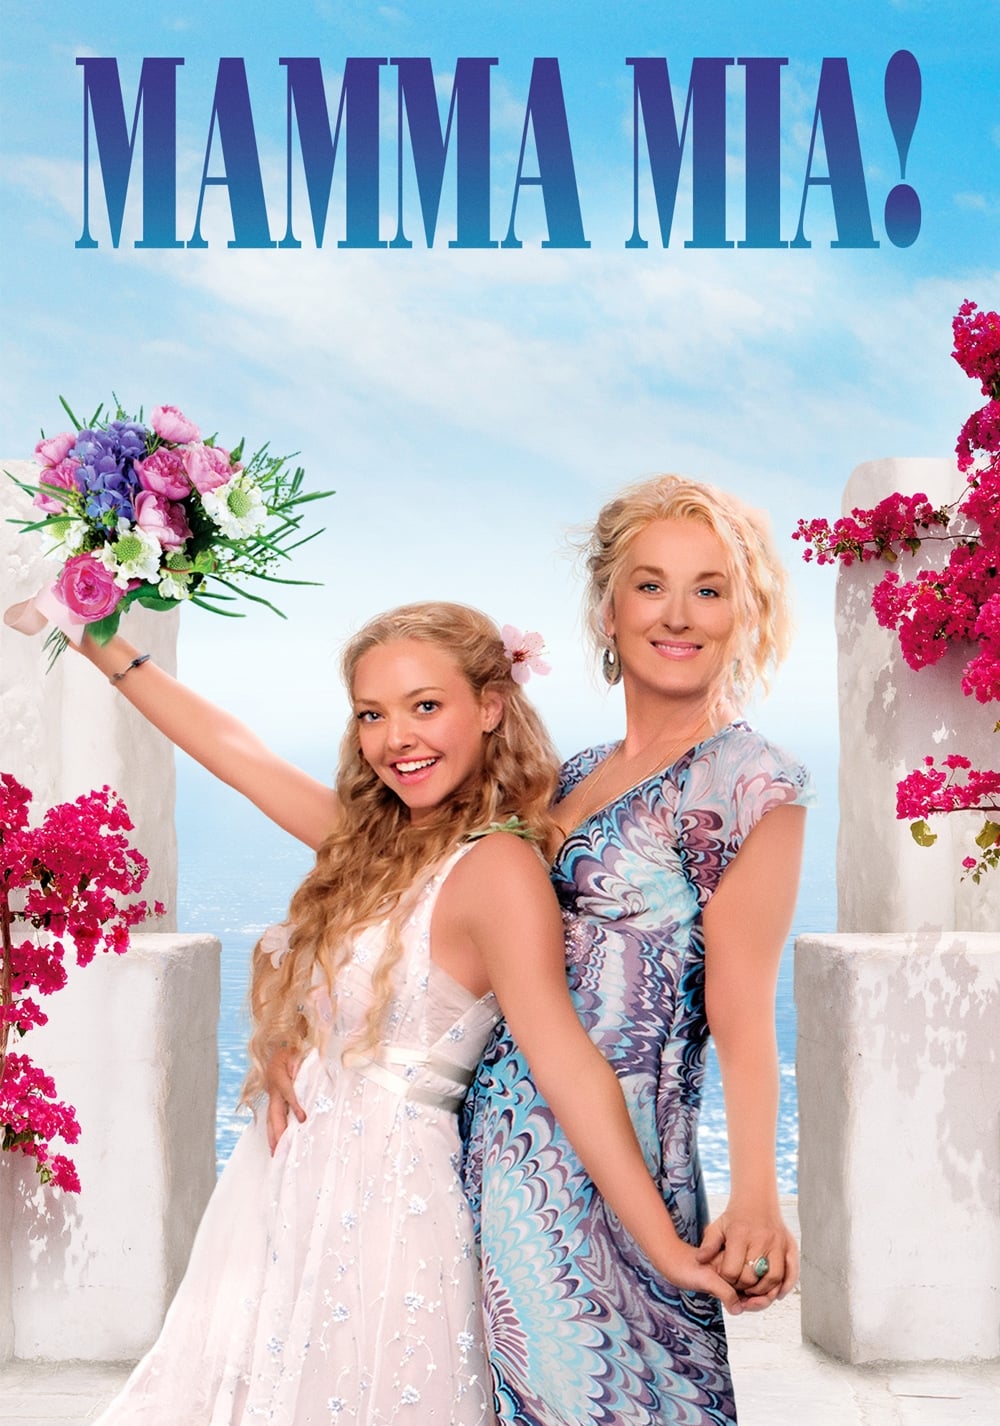 Mamma Mia Online Free Mamma Mia 2 Streaming Can You Watch The Full